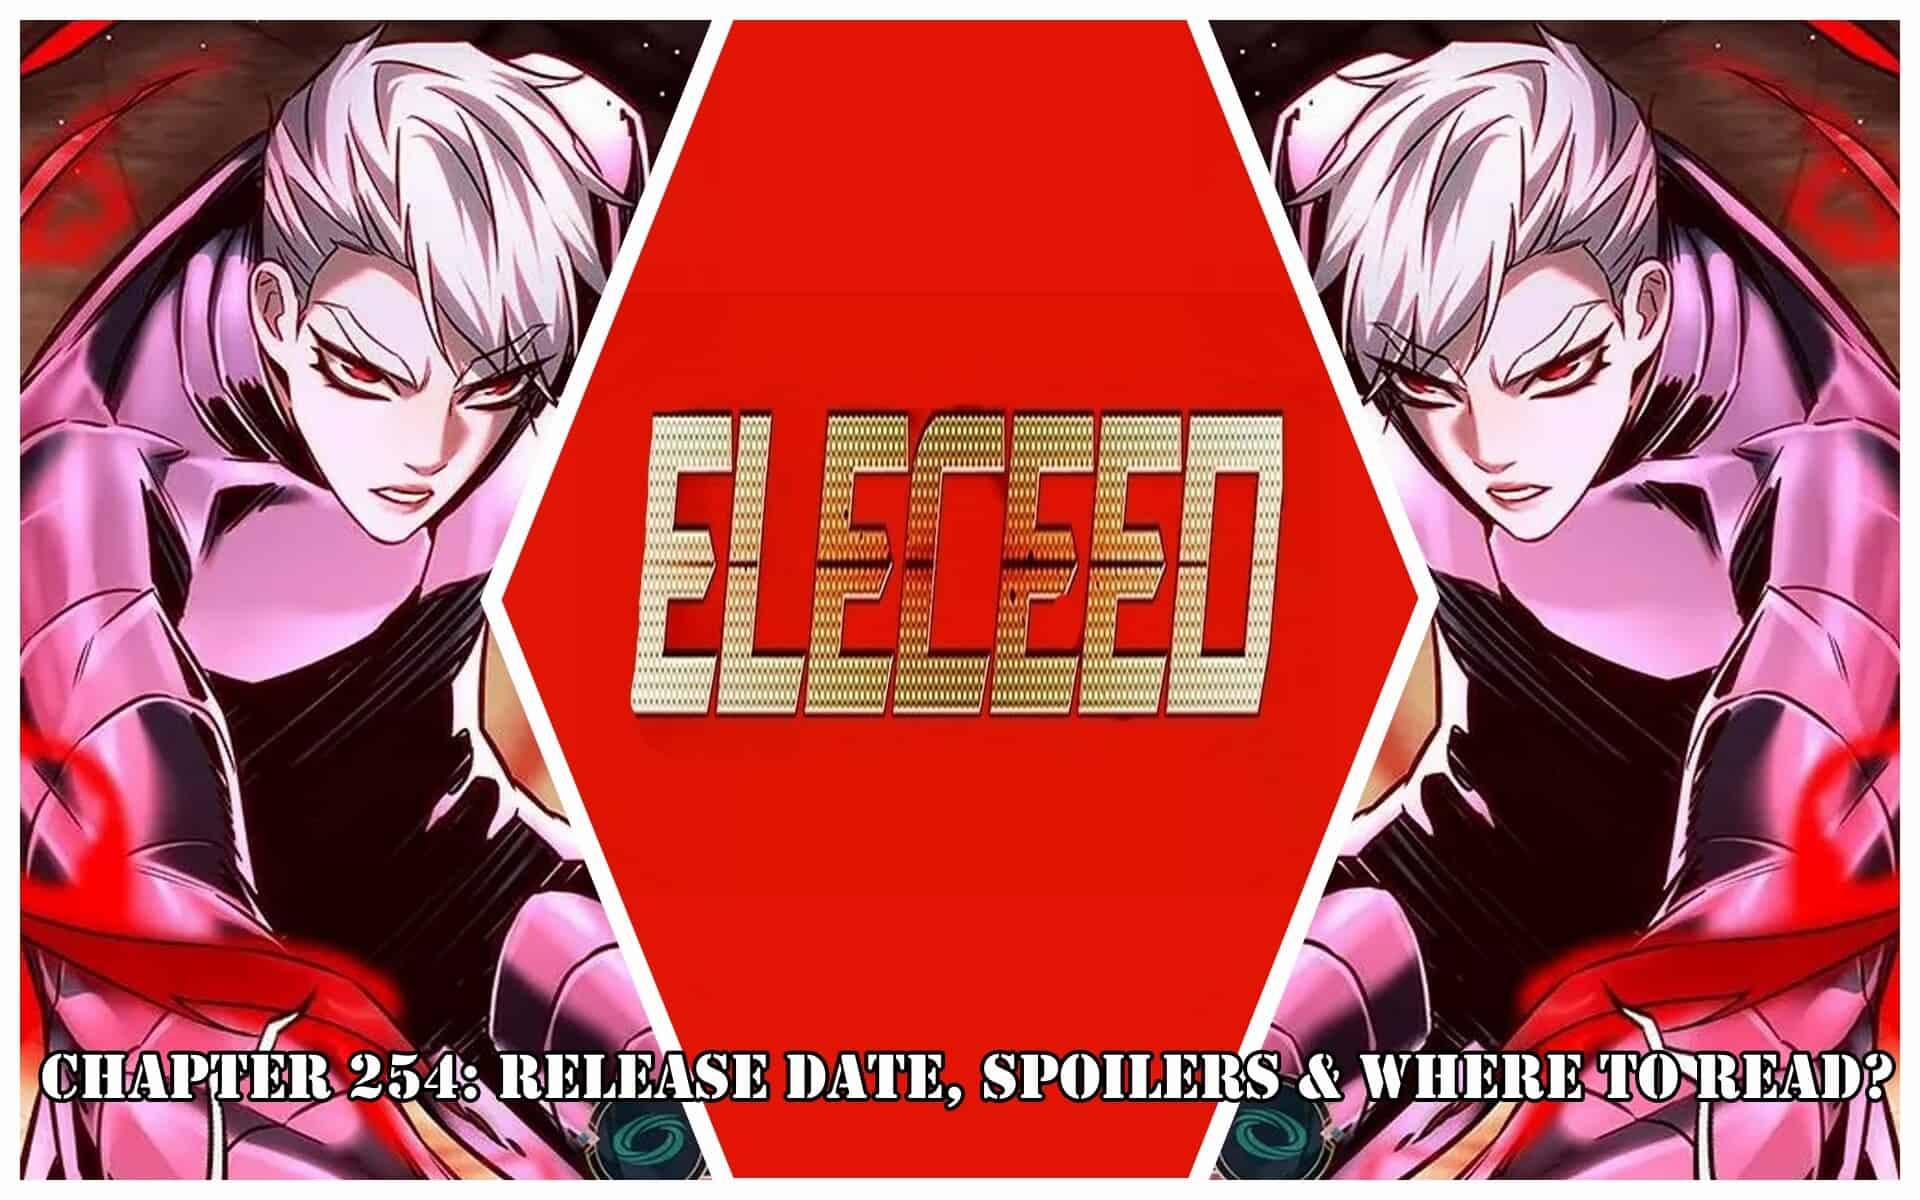 Eleceed Chapter 254: Release Date, Spoilers & Where to Read?